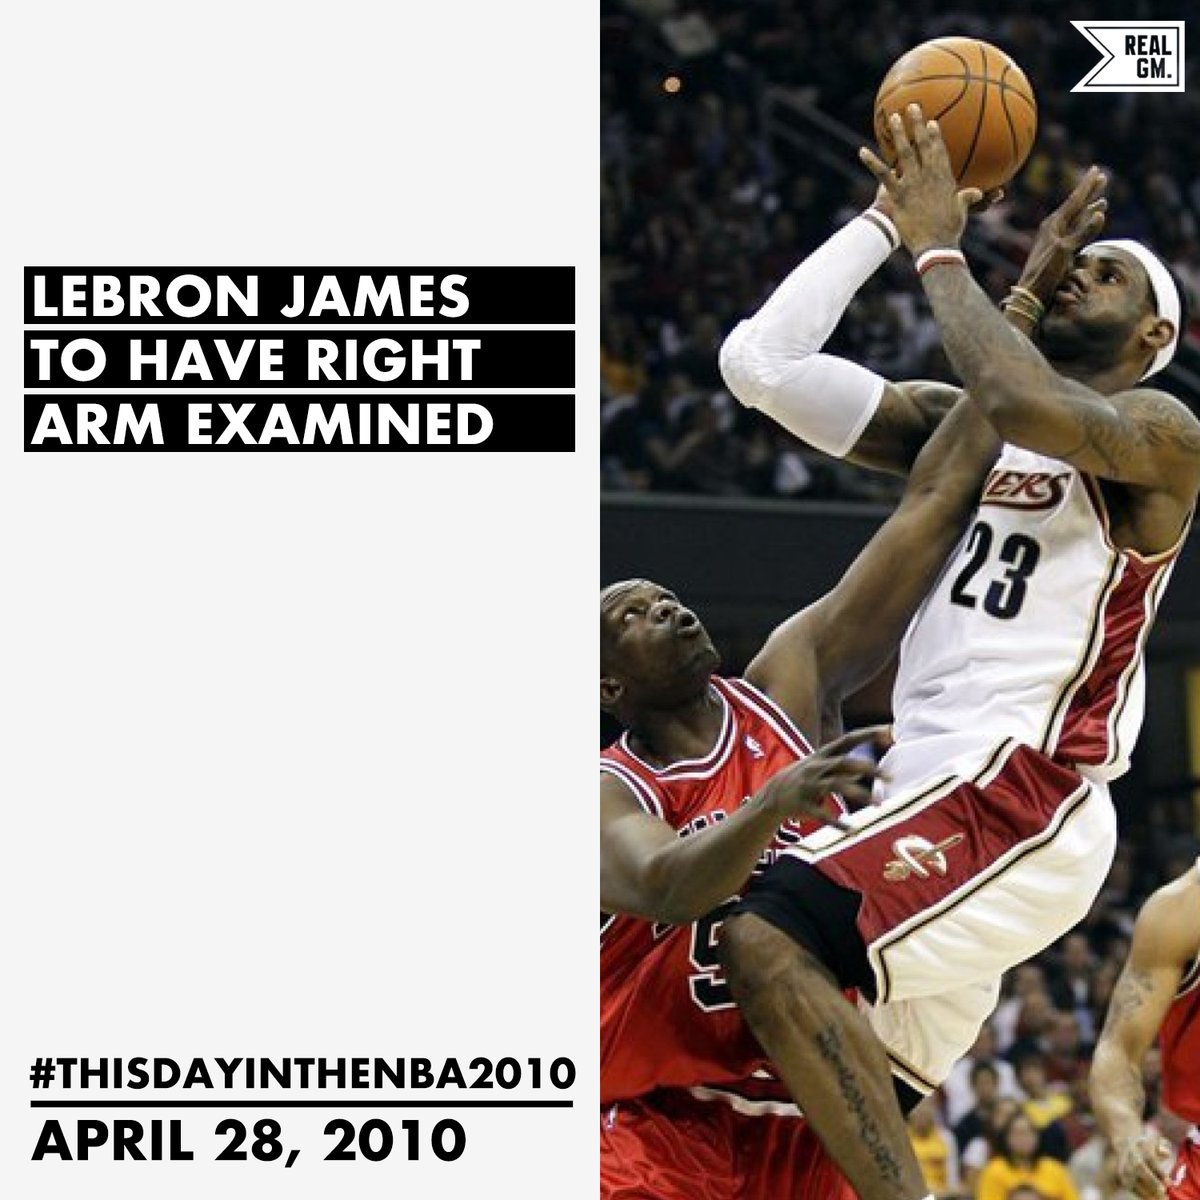  #ThisDayInTheNBA2010April 28, 2010LeBron James To Have Right Arm Examined https://basketball.realgm.com/wiretap/203555/LeBron-James-To-Have-Right-Arm-Examined